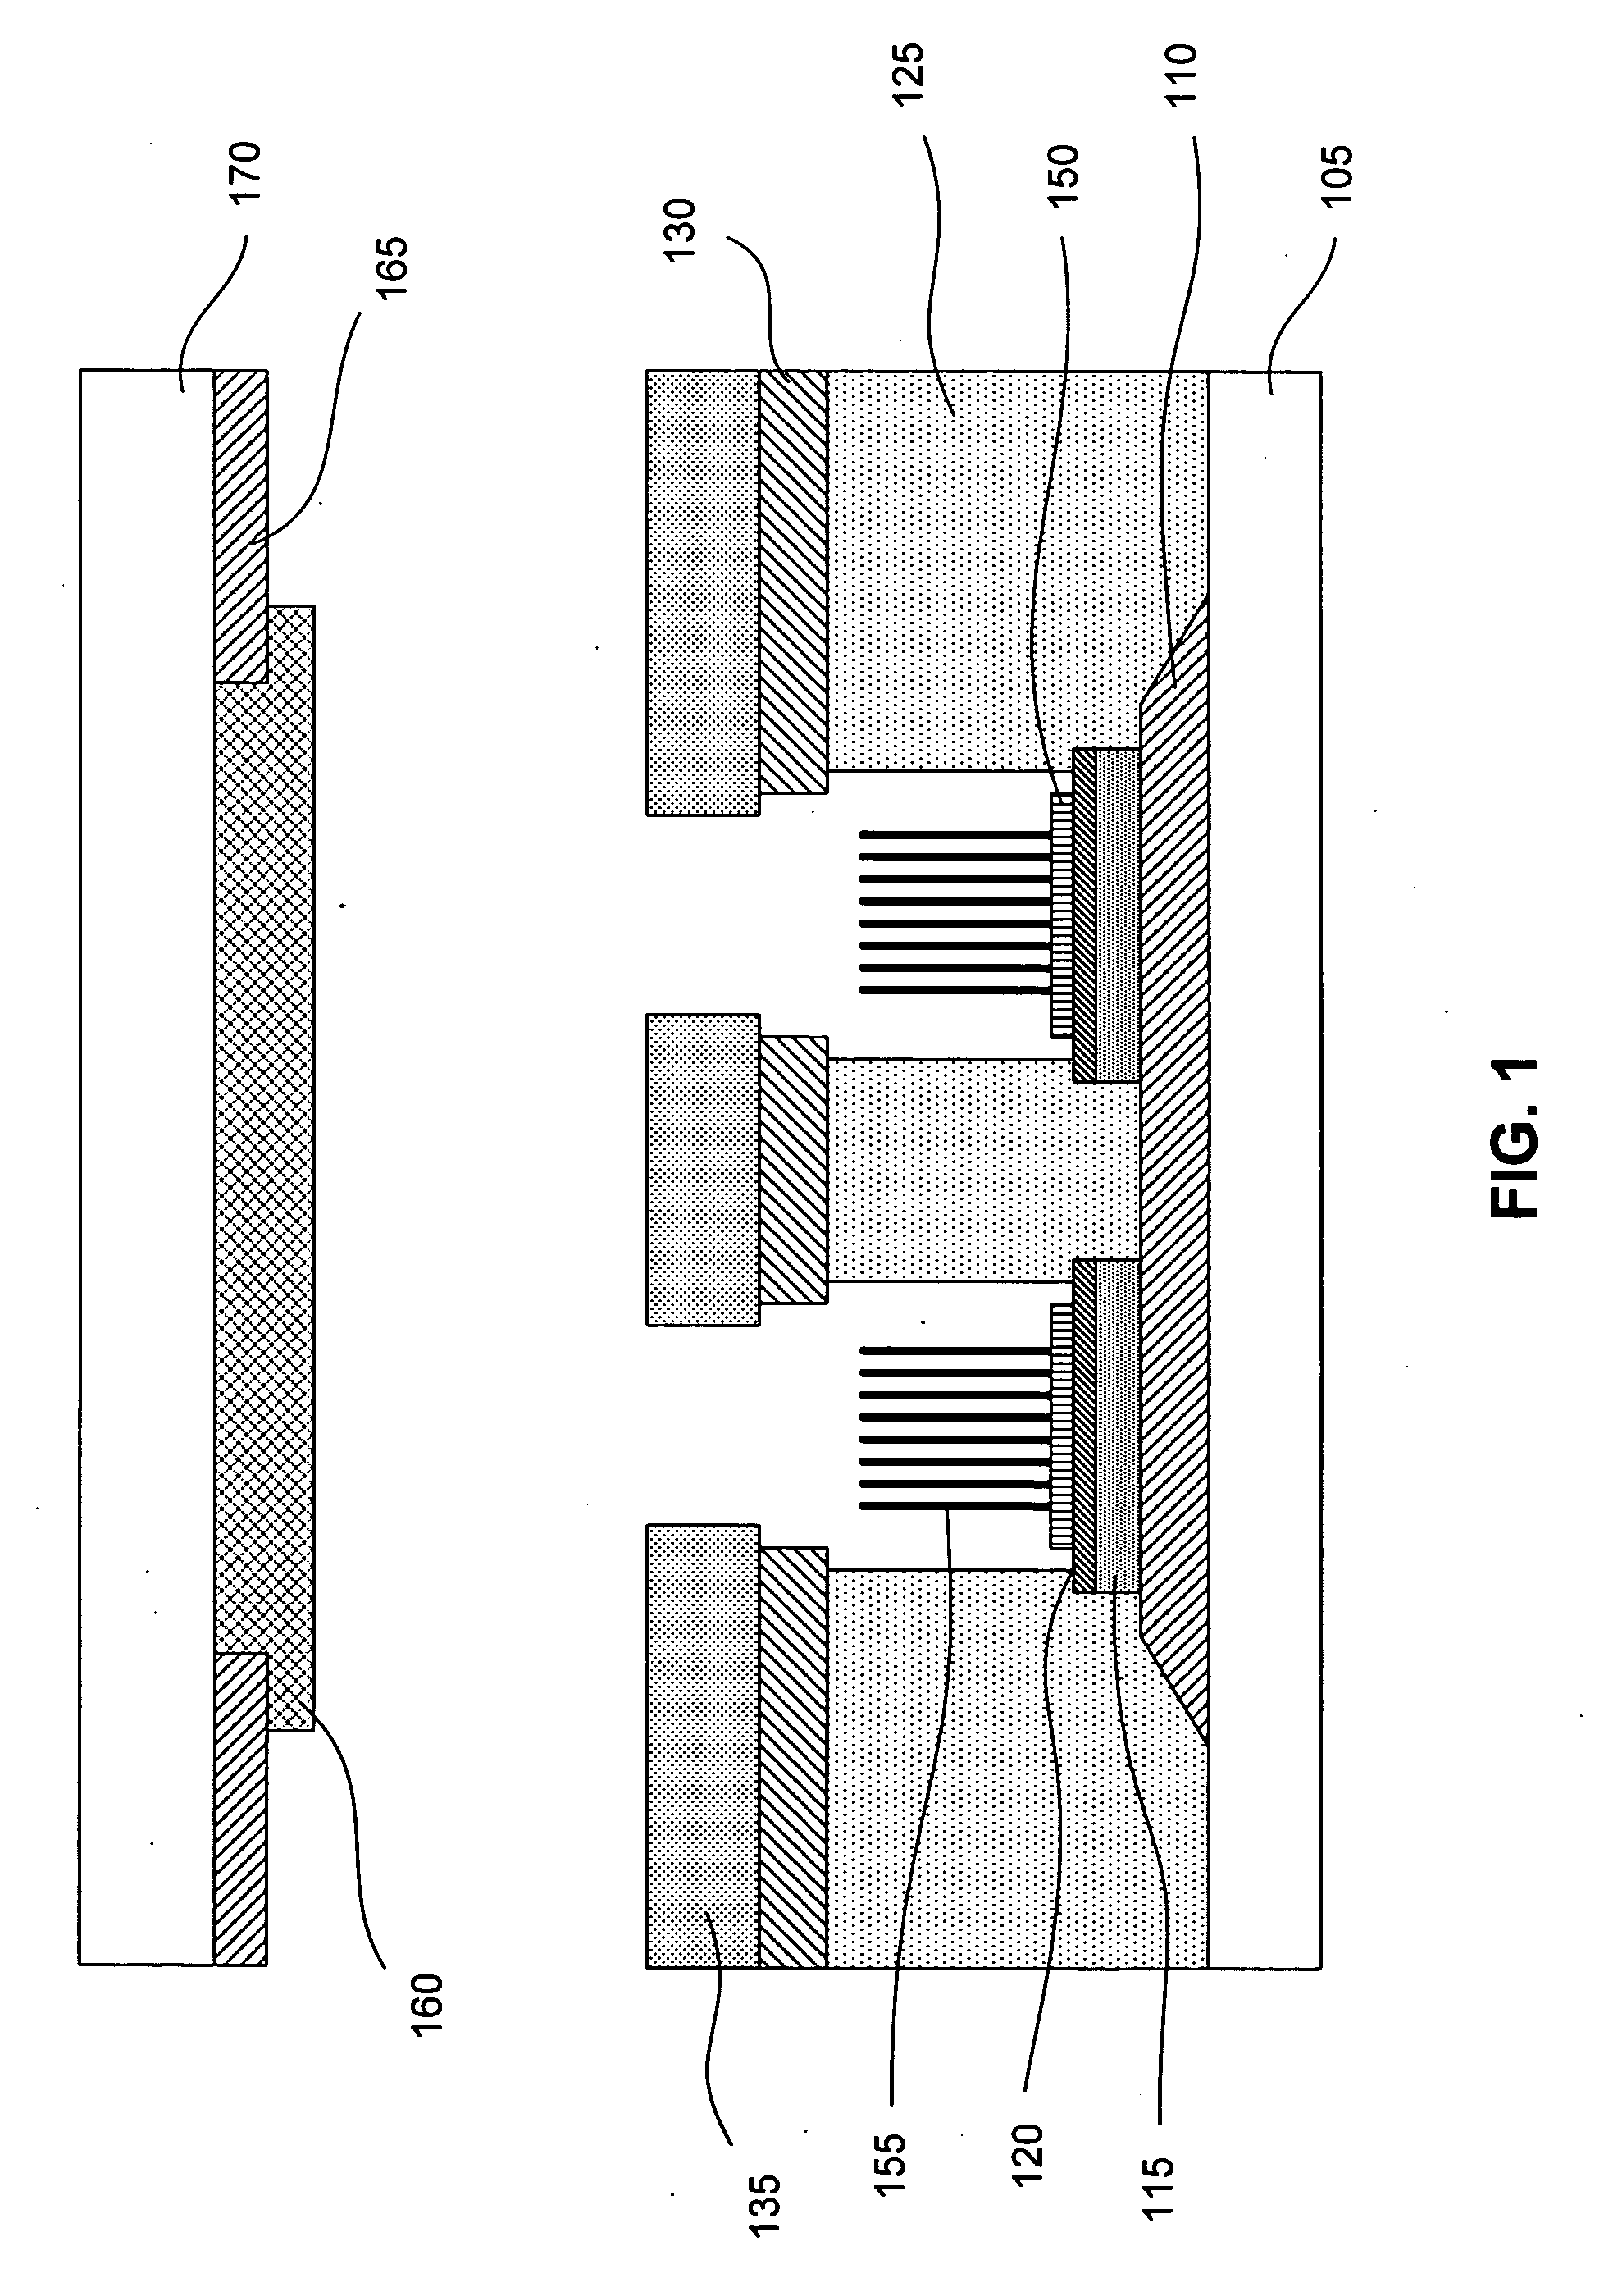 Emitter structure with a protected gate electrode for an electron-emitting device